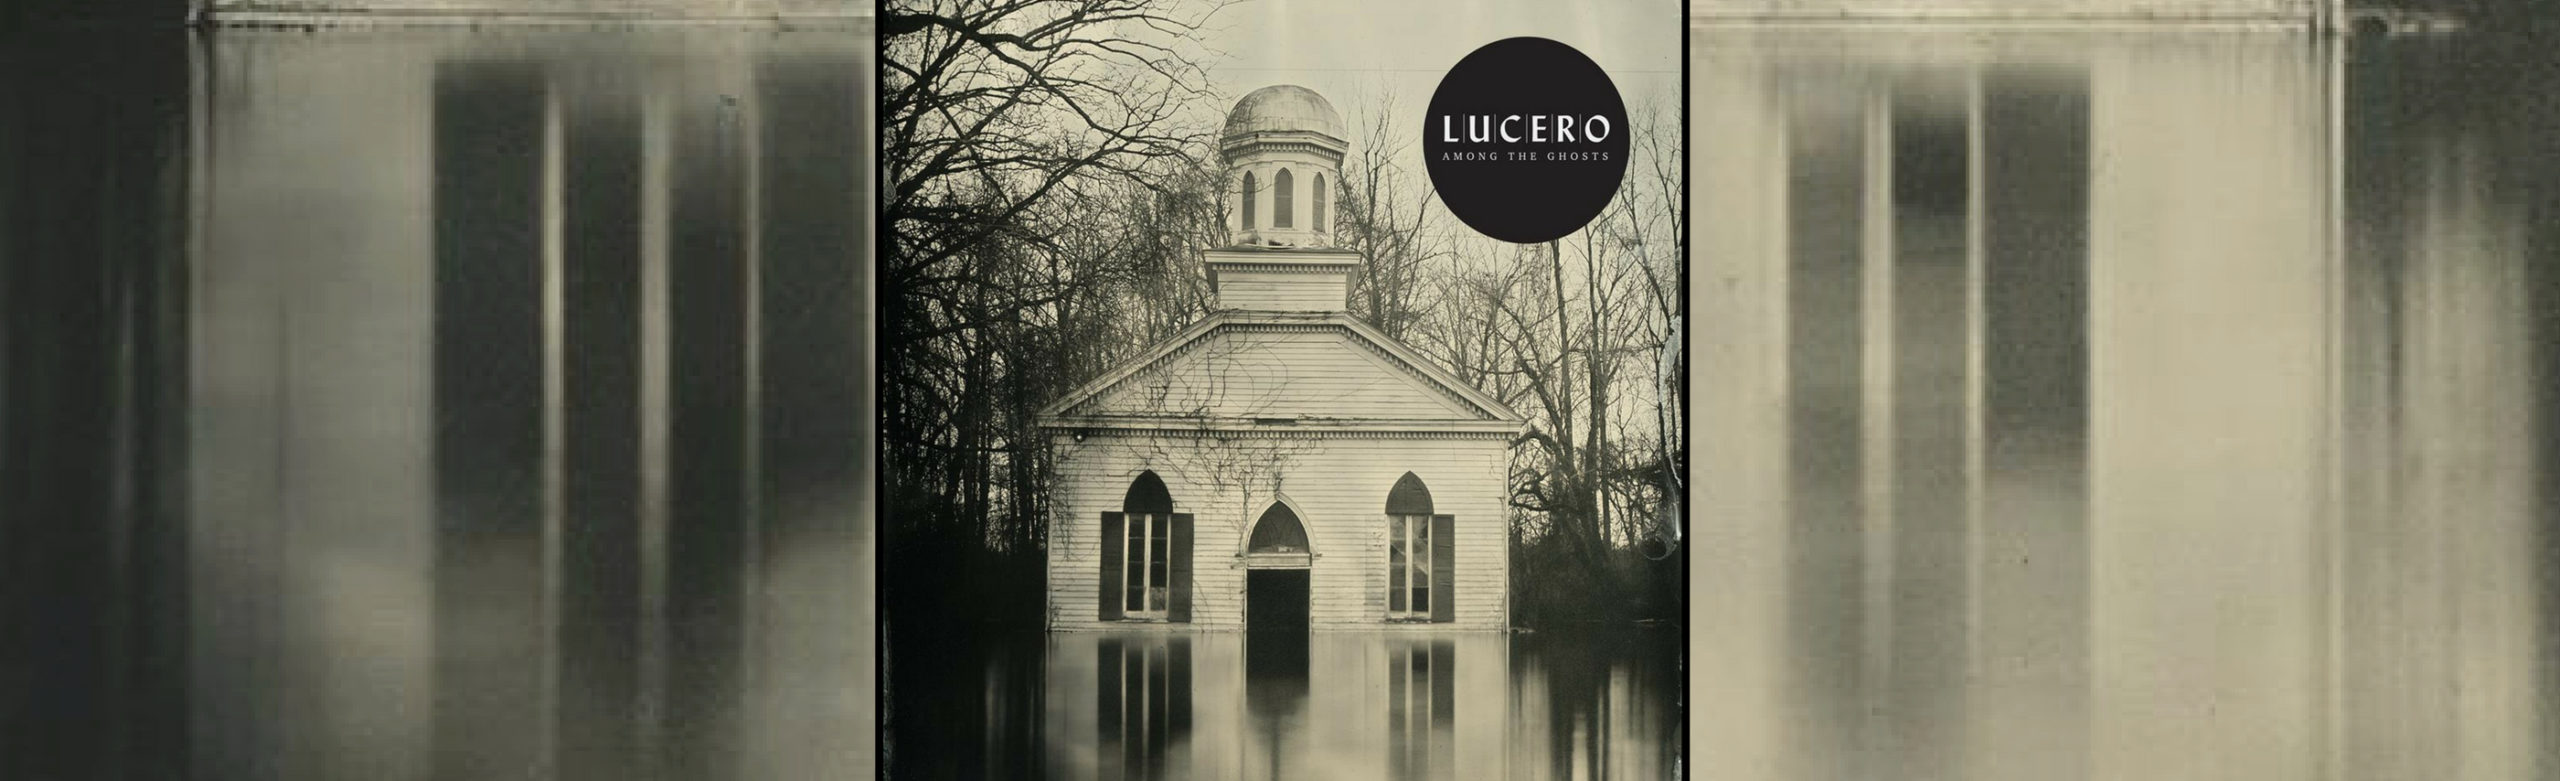 LISTEN: New Album “Among the Ghosts” Released by Lucero Image